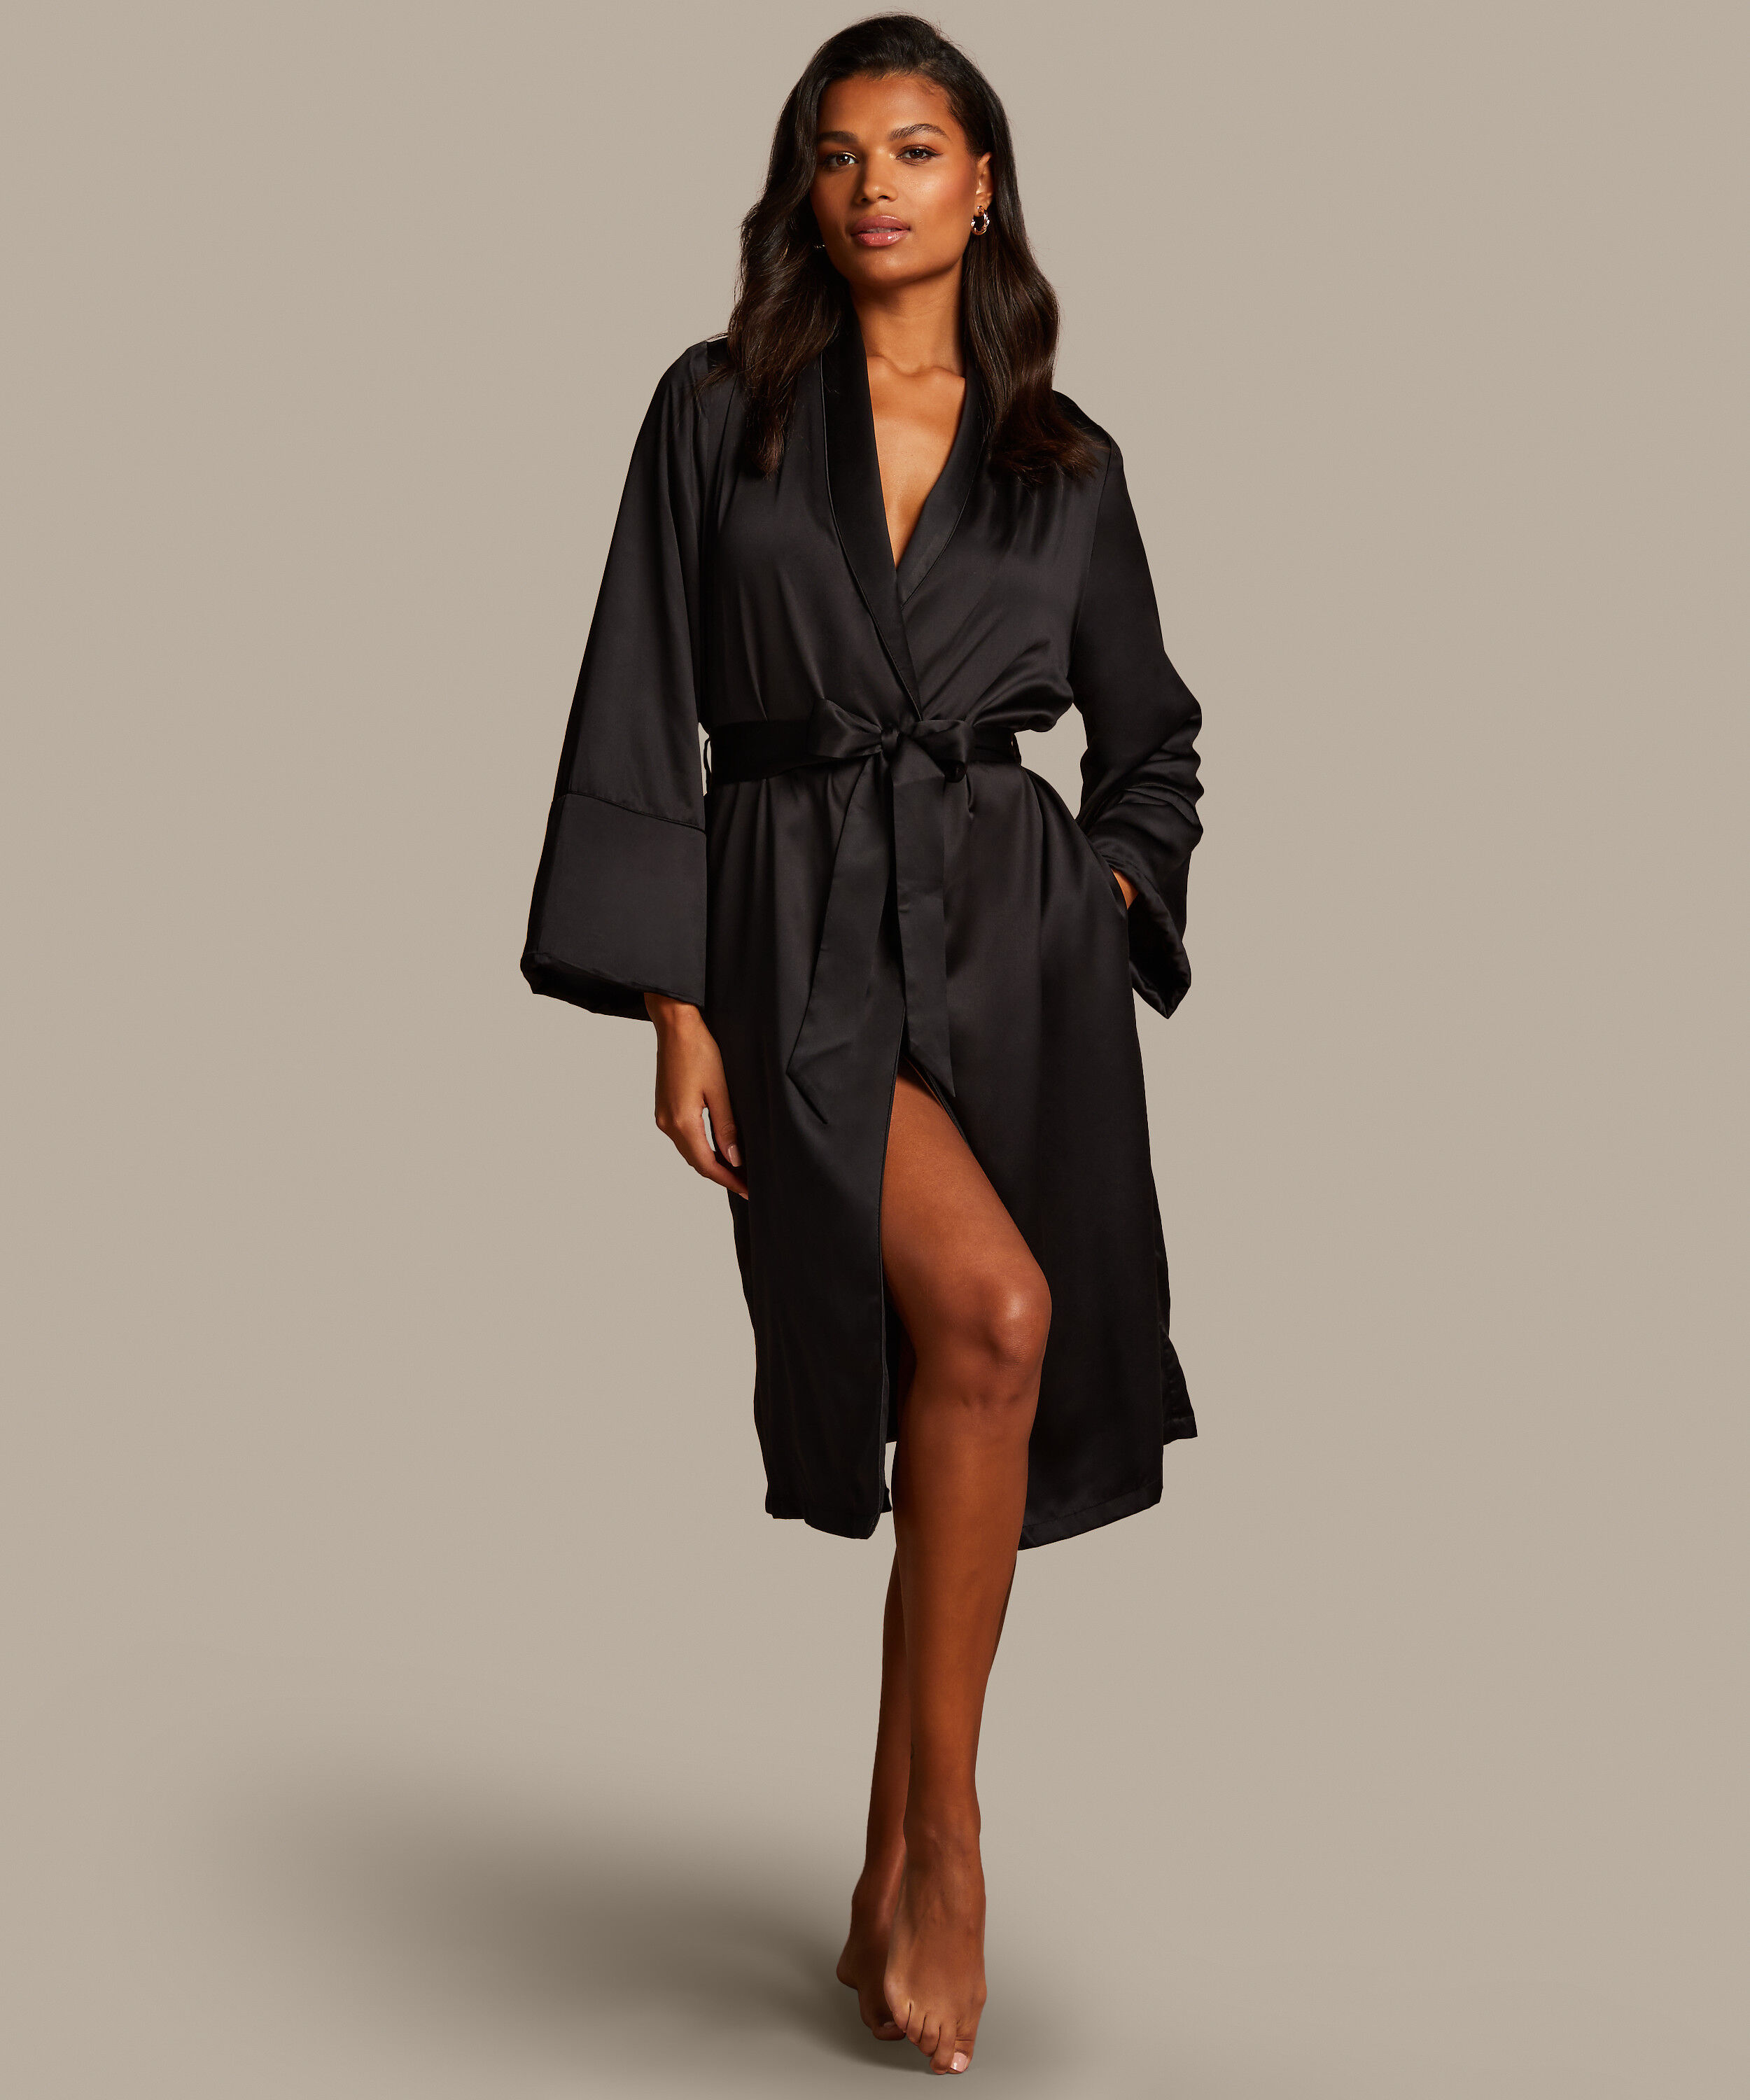 Letter Embroidered Belted Satin Robe | Night gown dress, Satin dressing gown,  Bridesmaid robes black